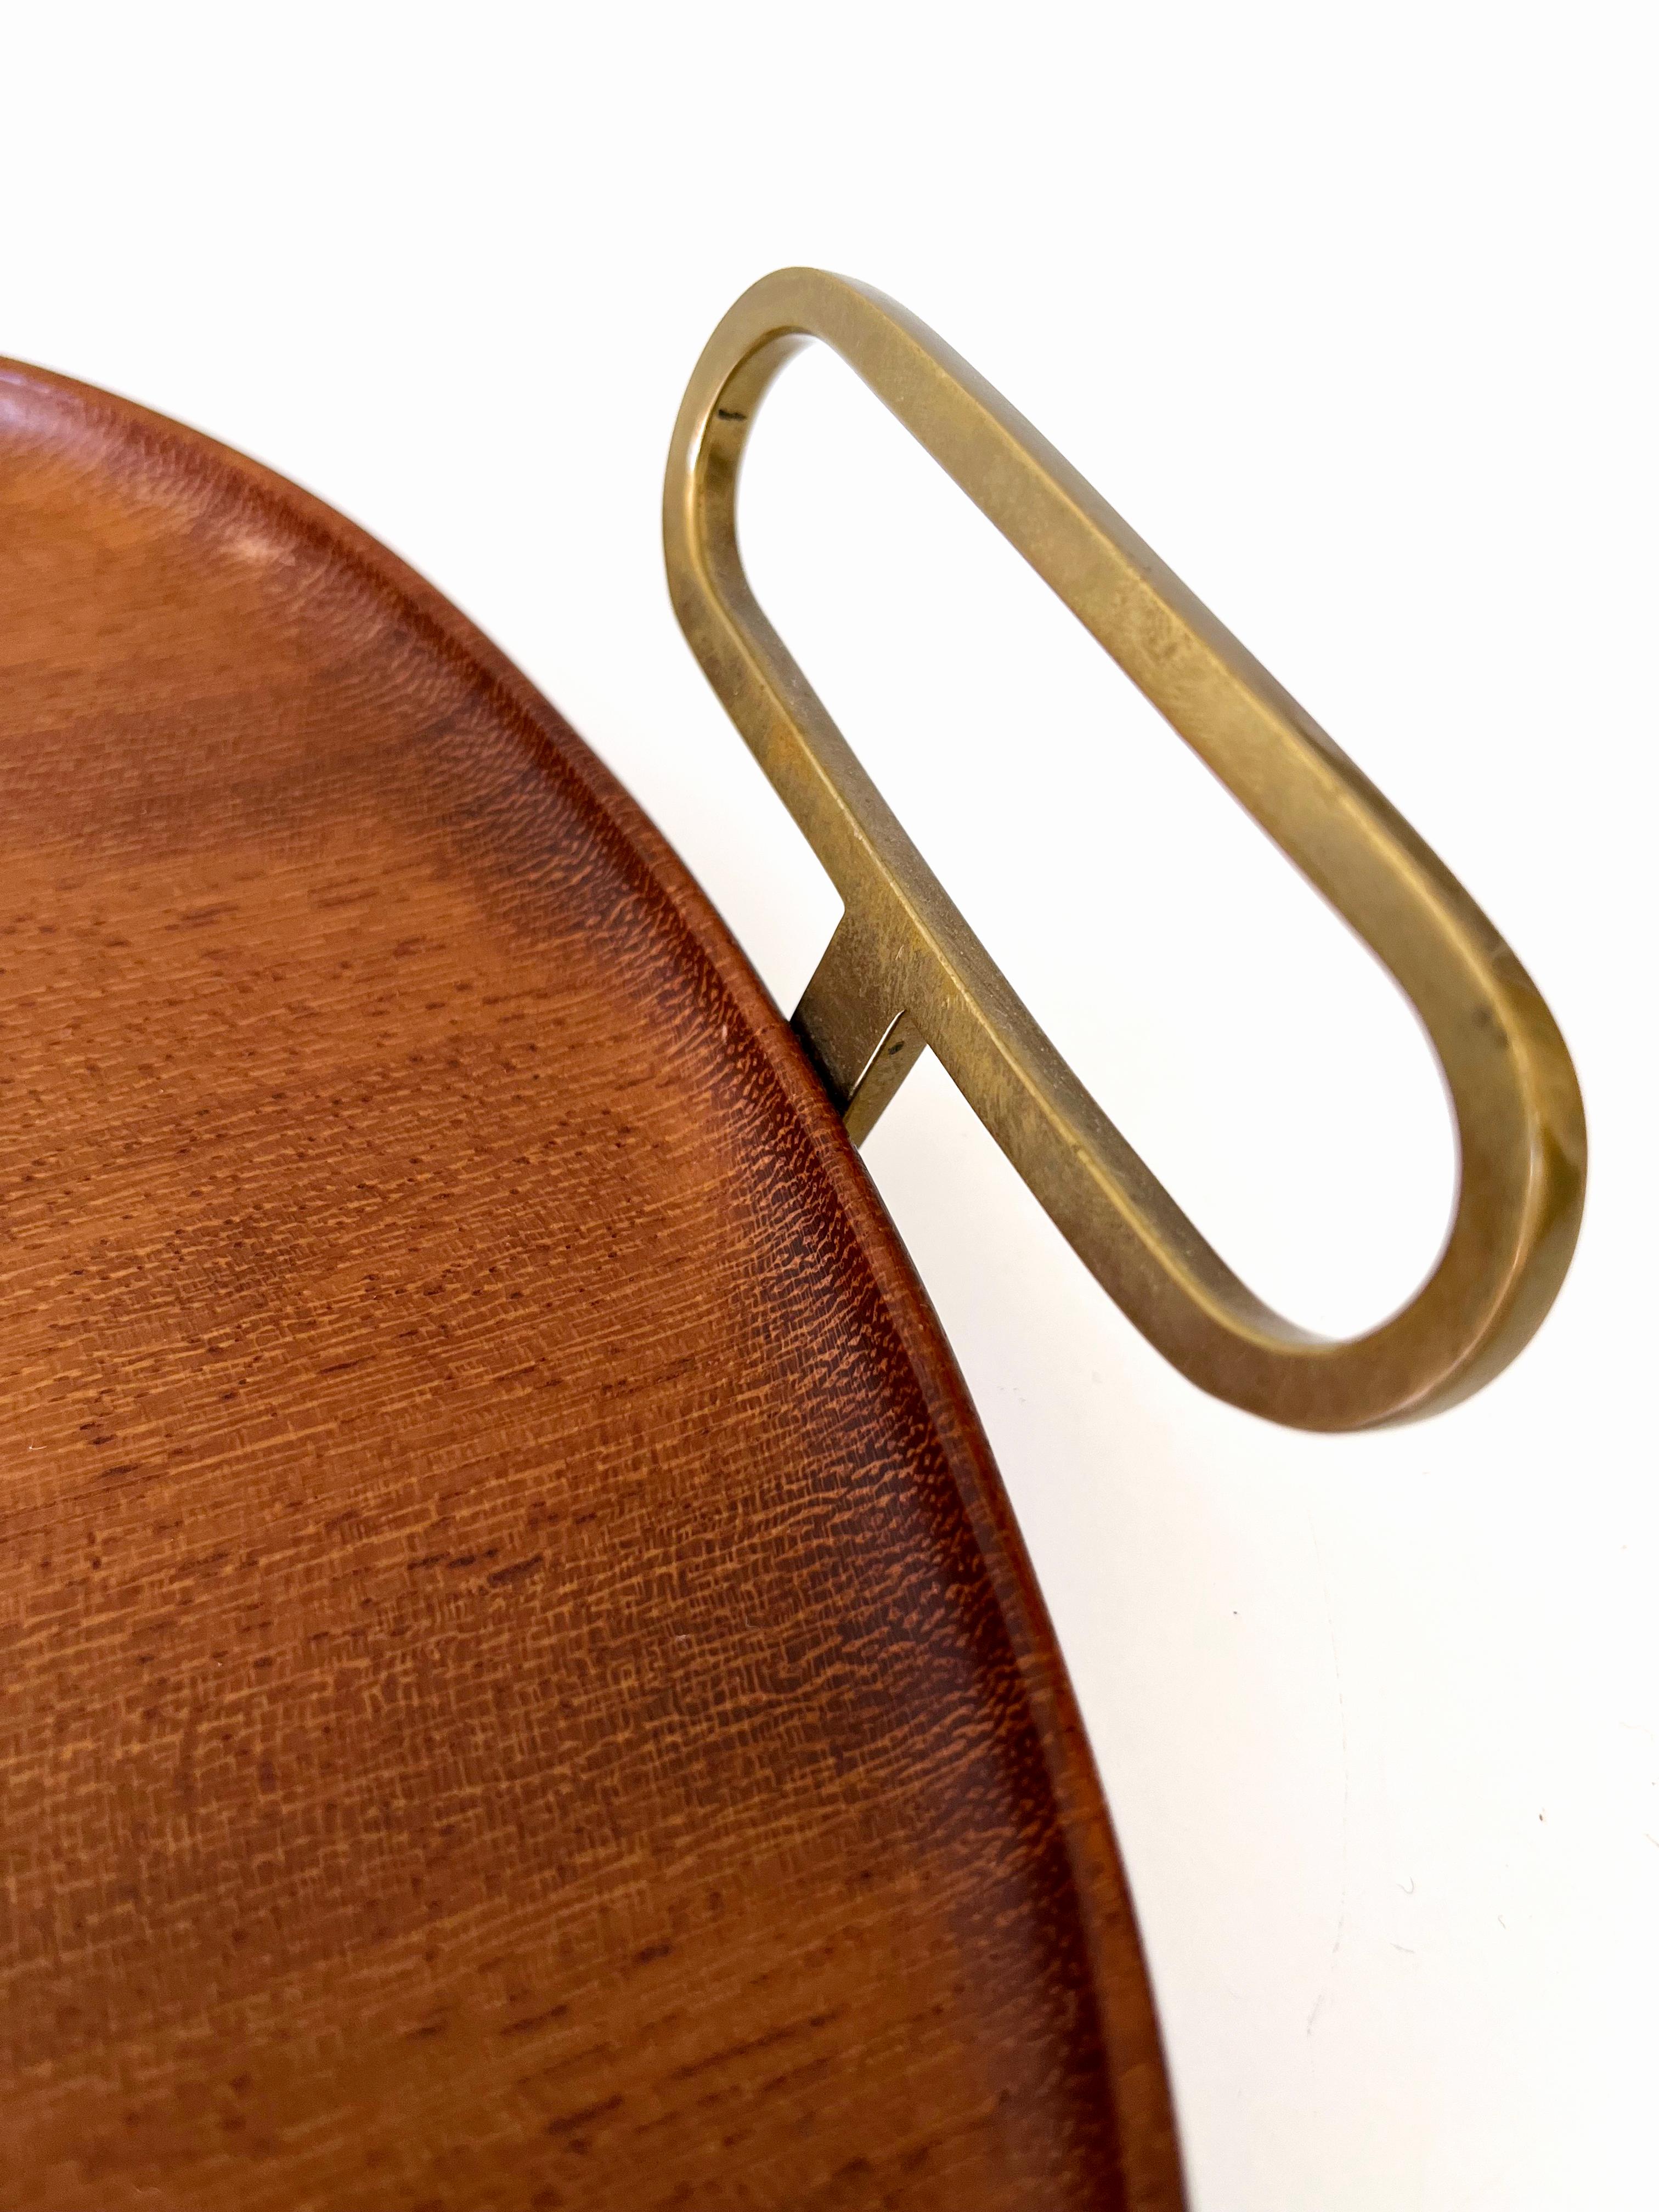 Extremely Rare Mid-Century Modern Teak Serving Tray by Carl Auböck Austria 1950s For Sale 9